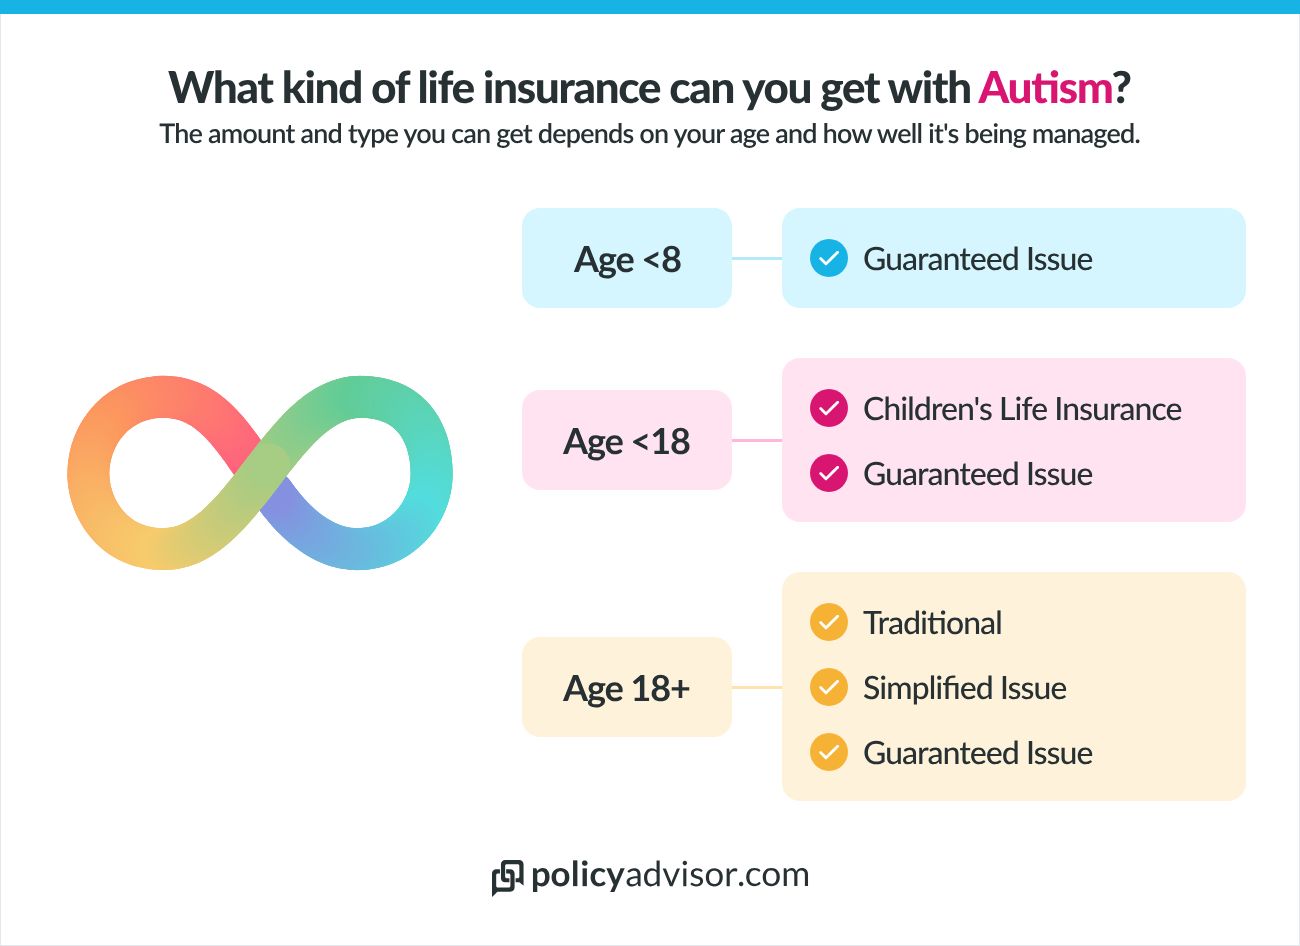 Autistic people can qualify for many types of life insurance, depending on their age, severity of autism, and how well it's being managed.